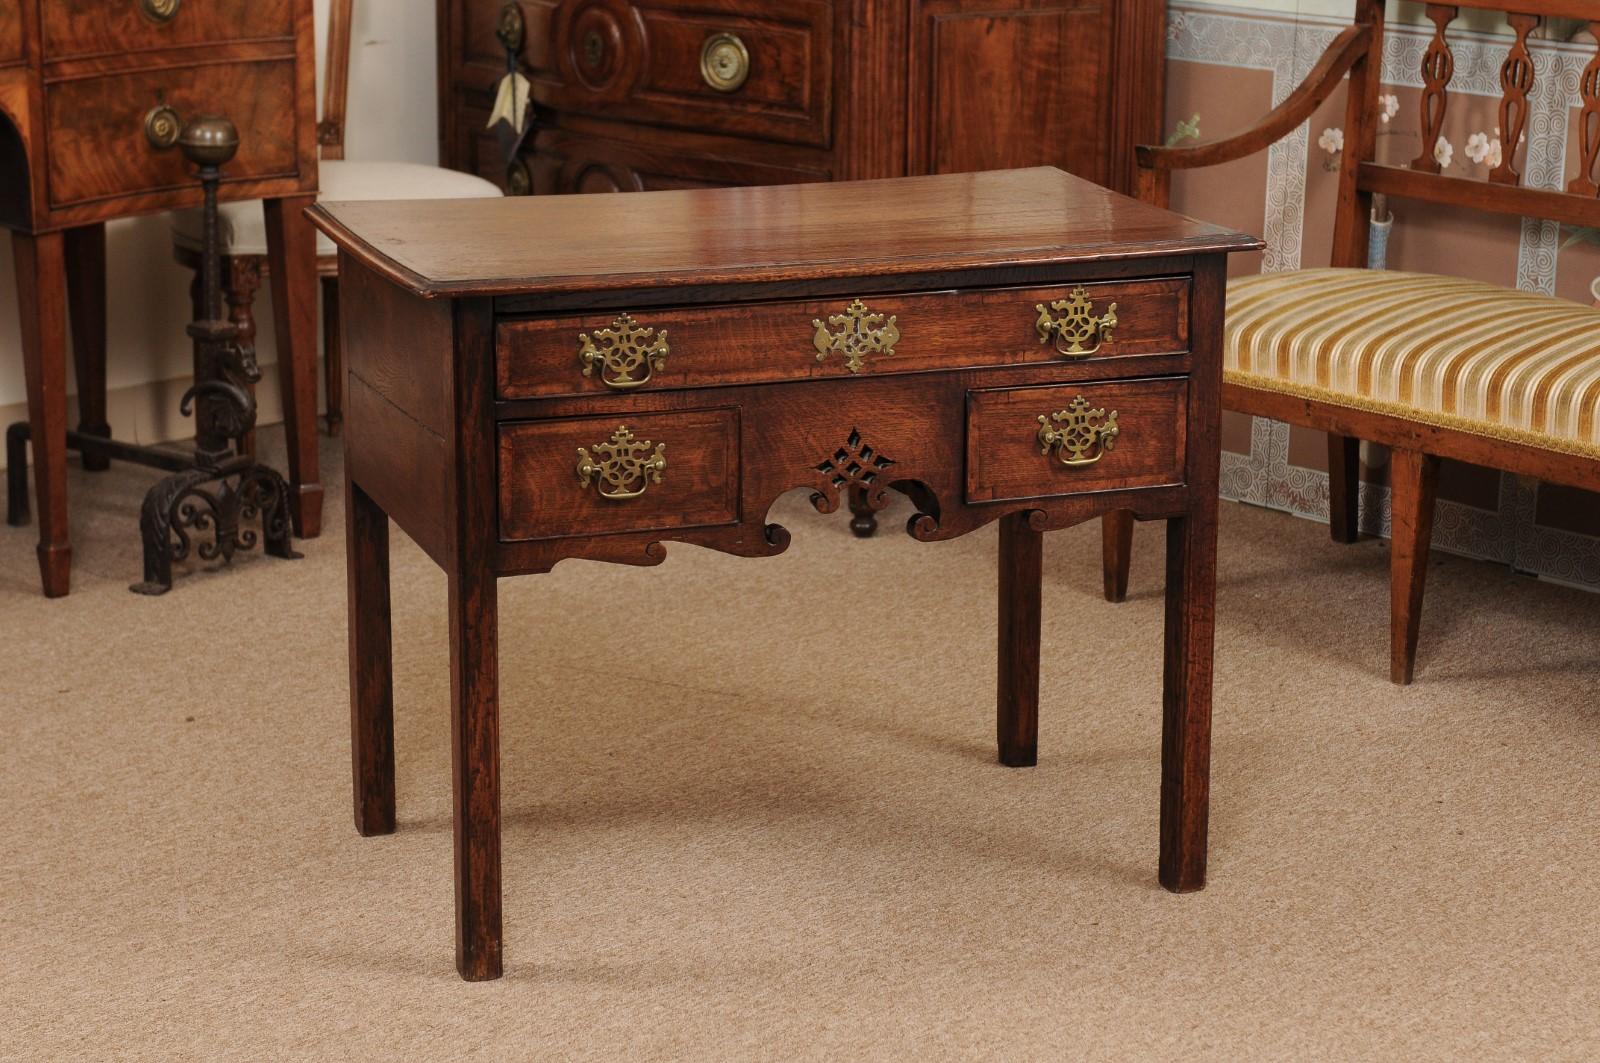 Chippendale oak low boy with 3-drawer configuration, crossbanding, and scroll detail on apron, England circa 1760.